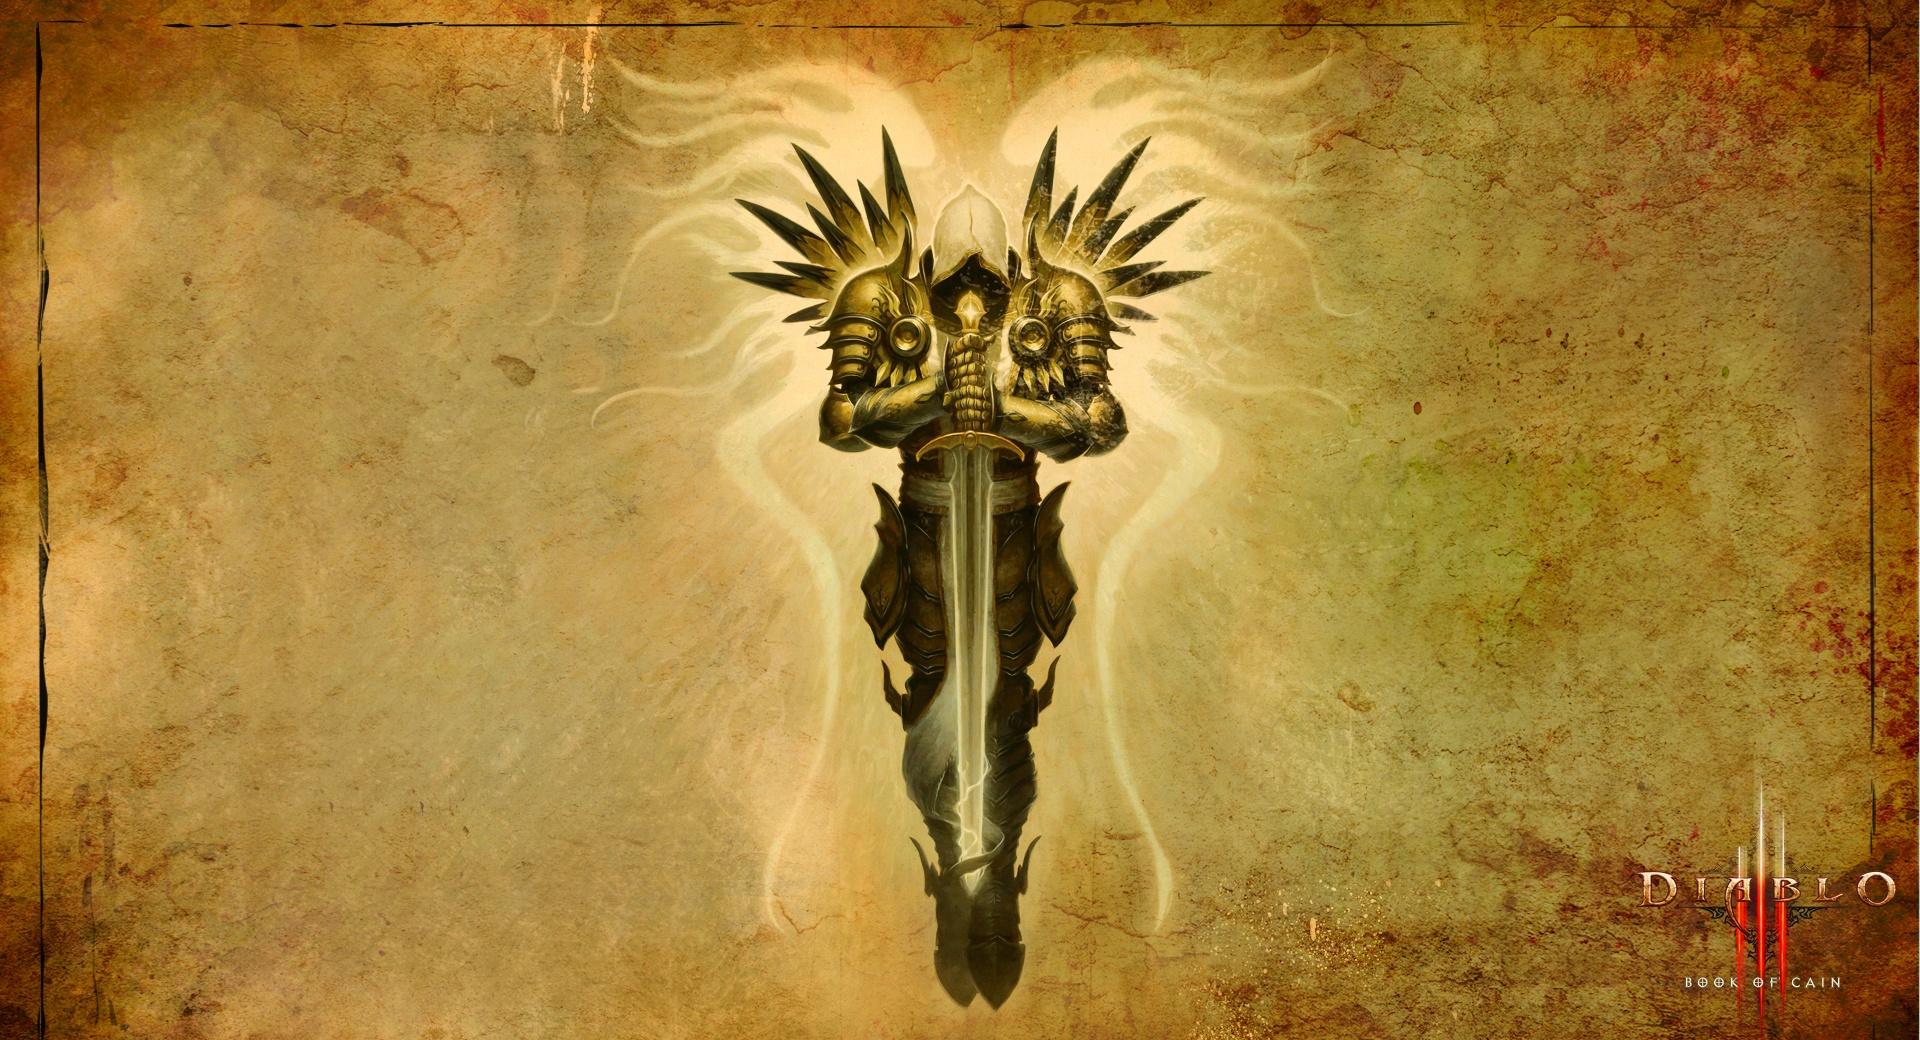 Diablo III Book of Cain wallpapers HD quality